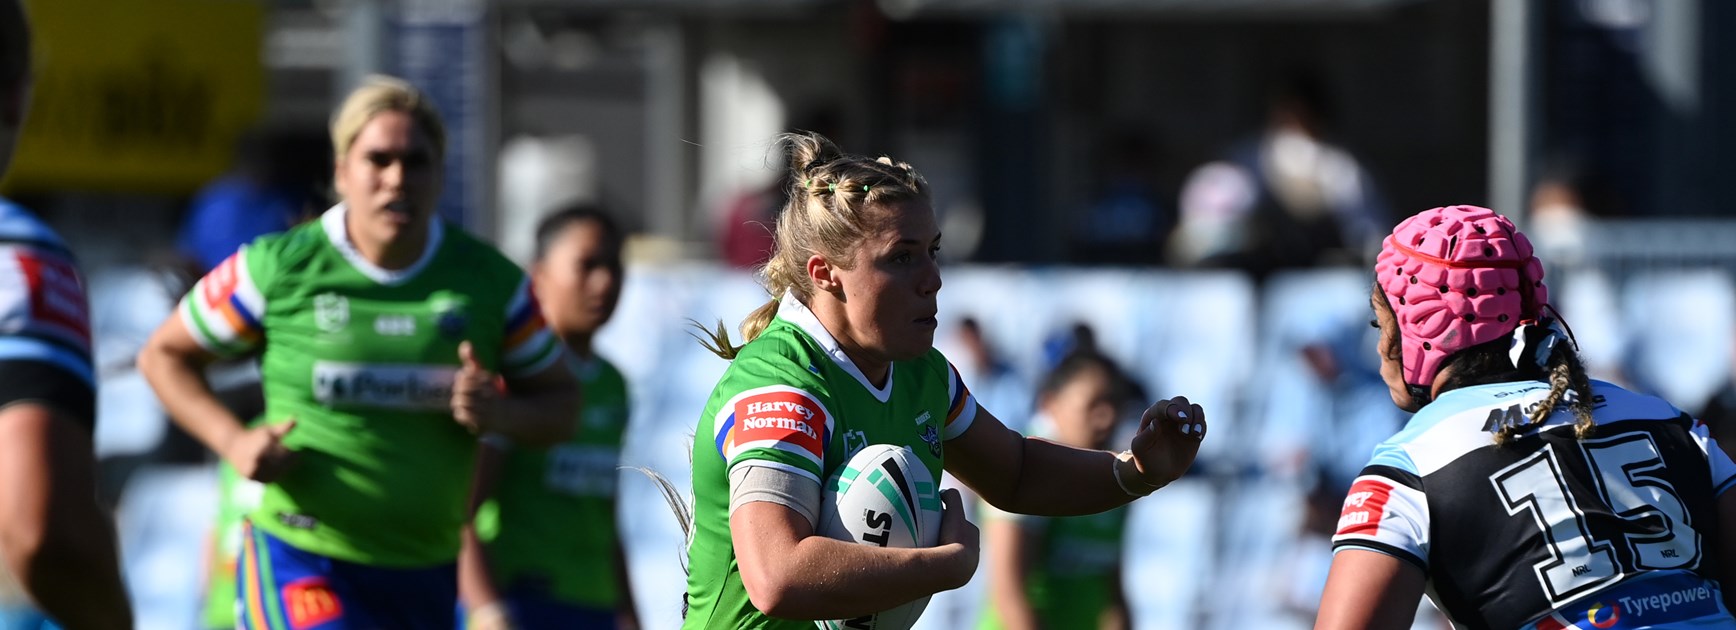 Raiders go down to Sharks in NRLW round one